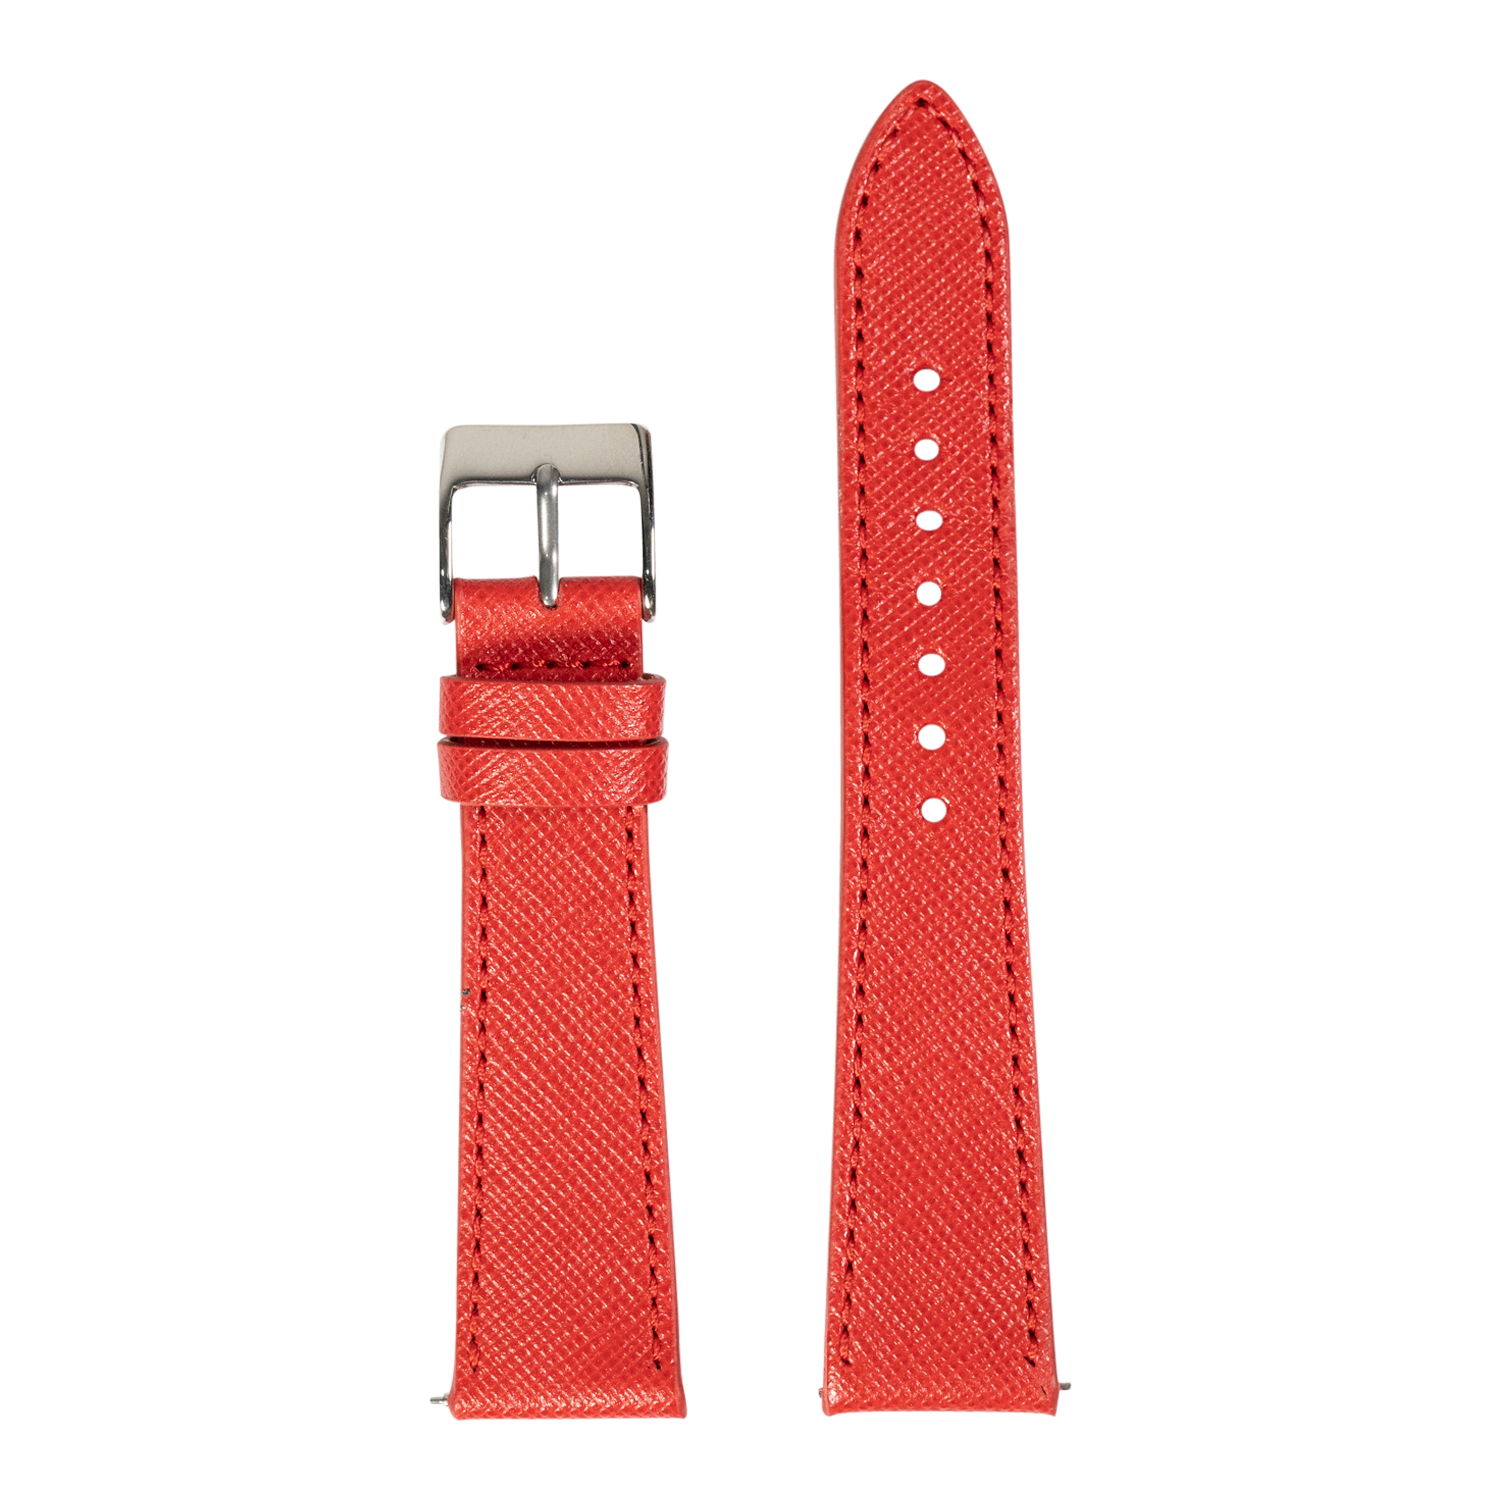 [QuickFit] Saffiano Leather - Red 20mm